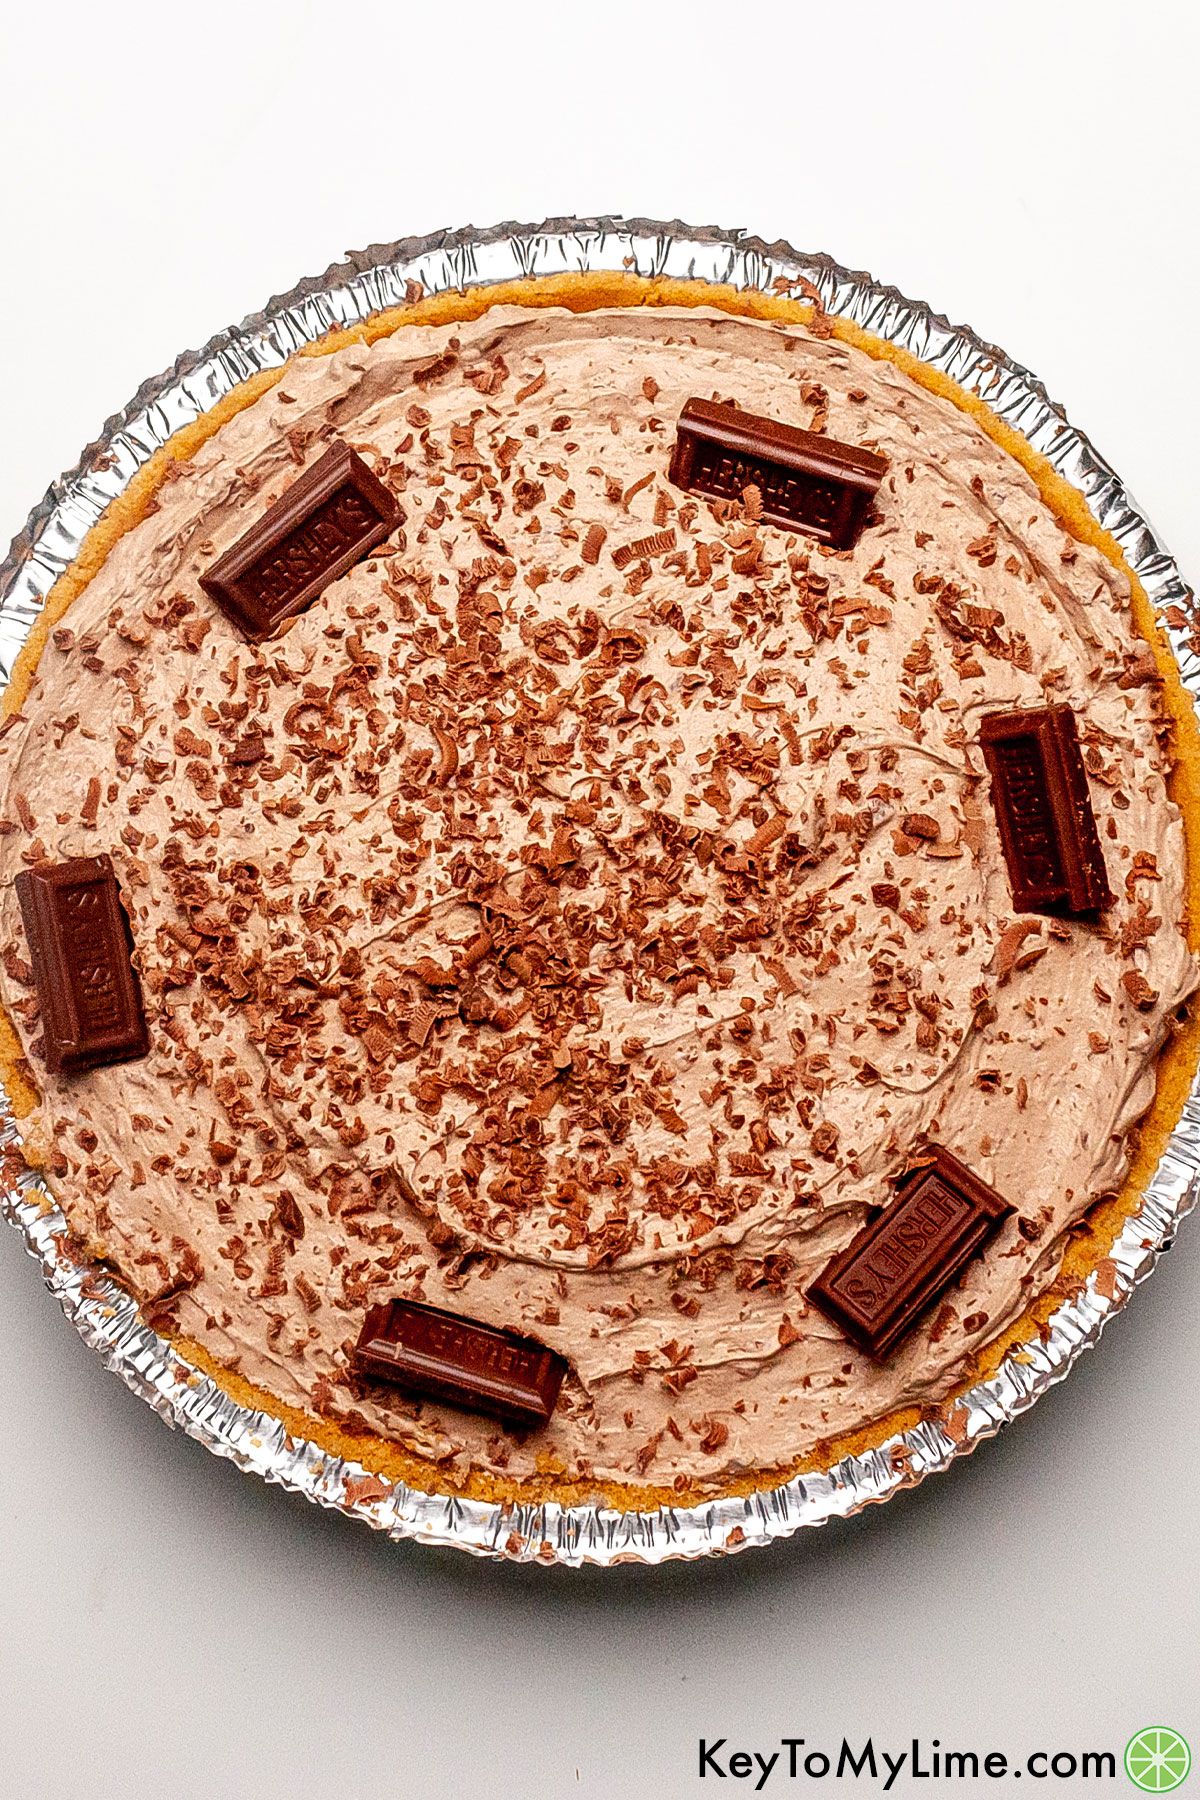 An overhead image of Hershey pie garnished with chocolate squares and shaved chocolate.